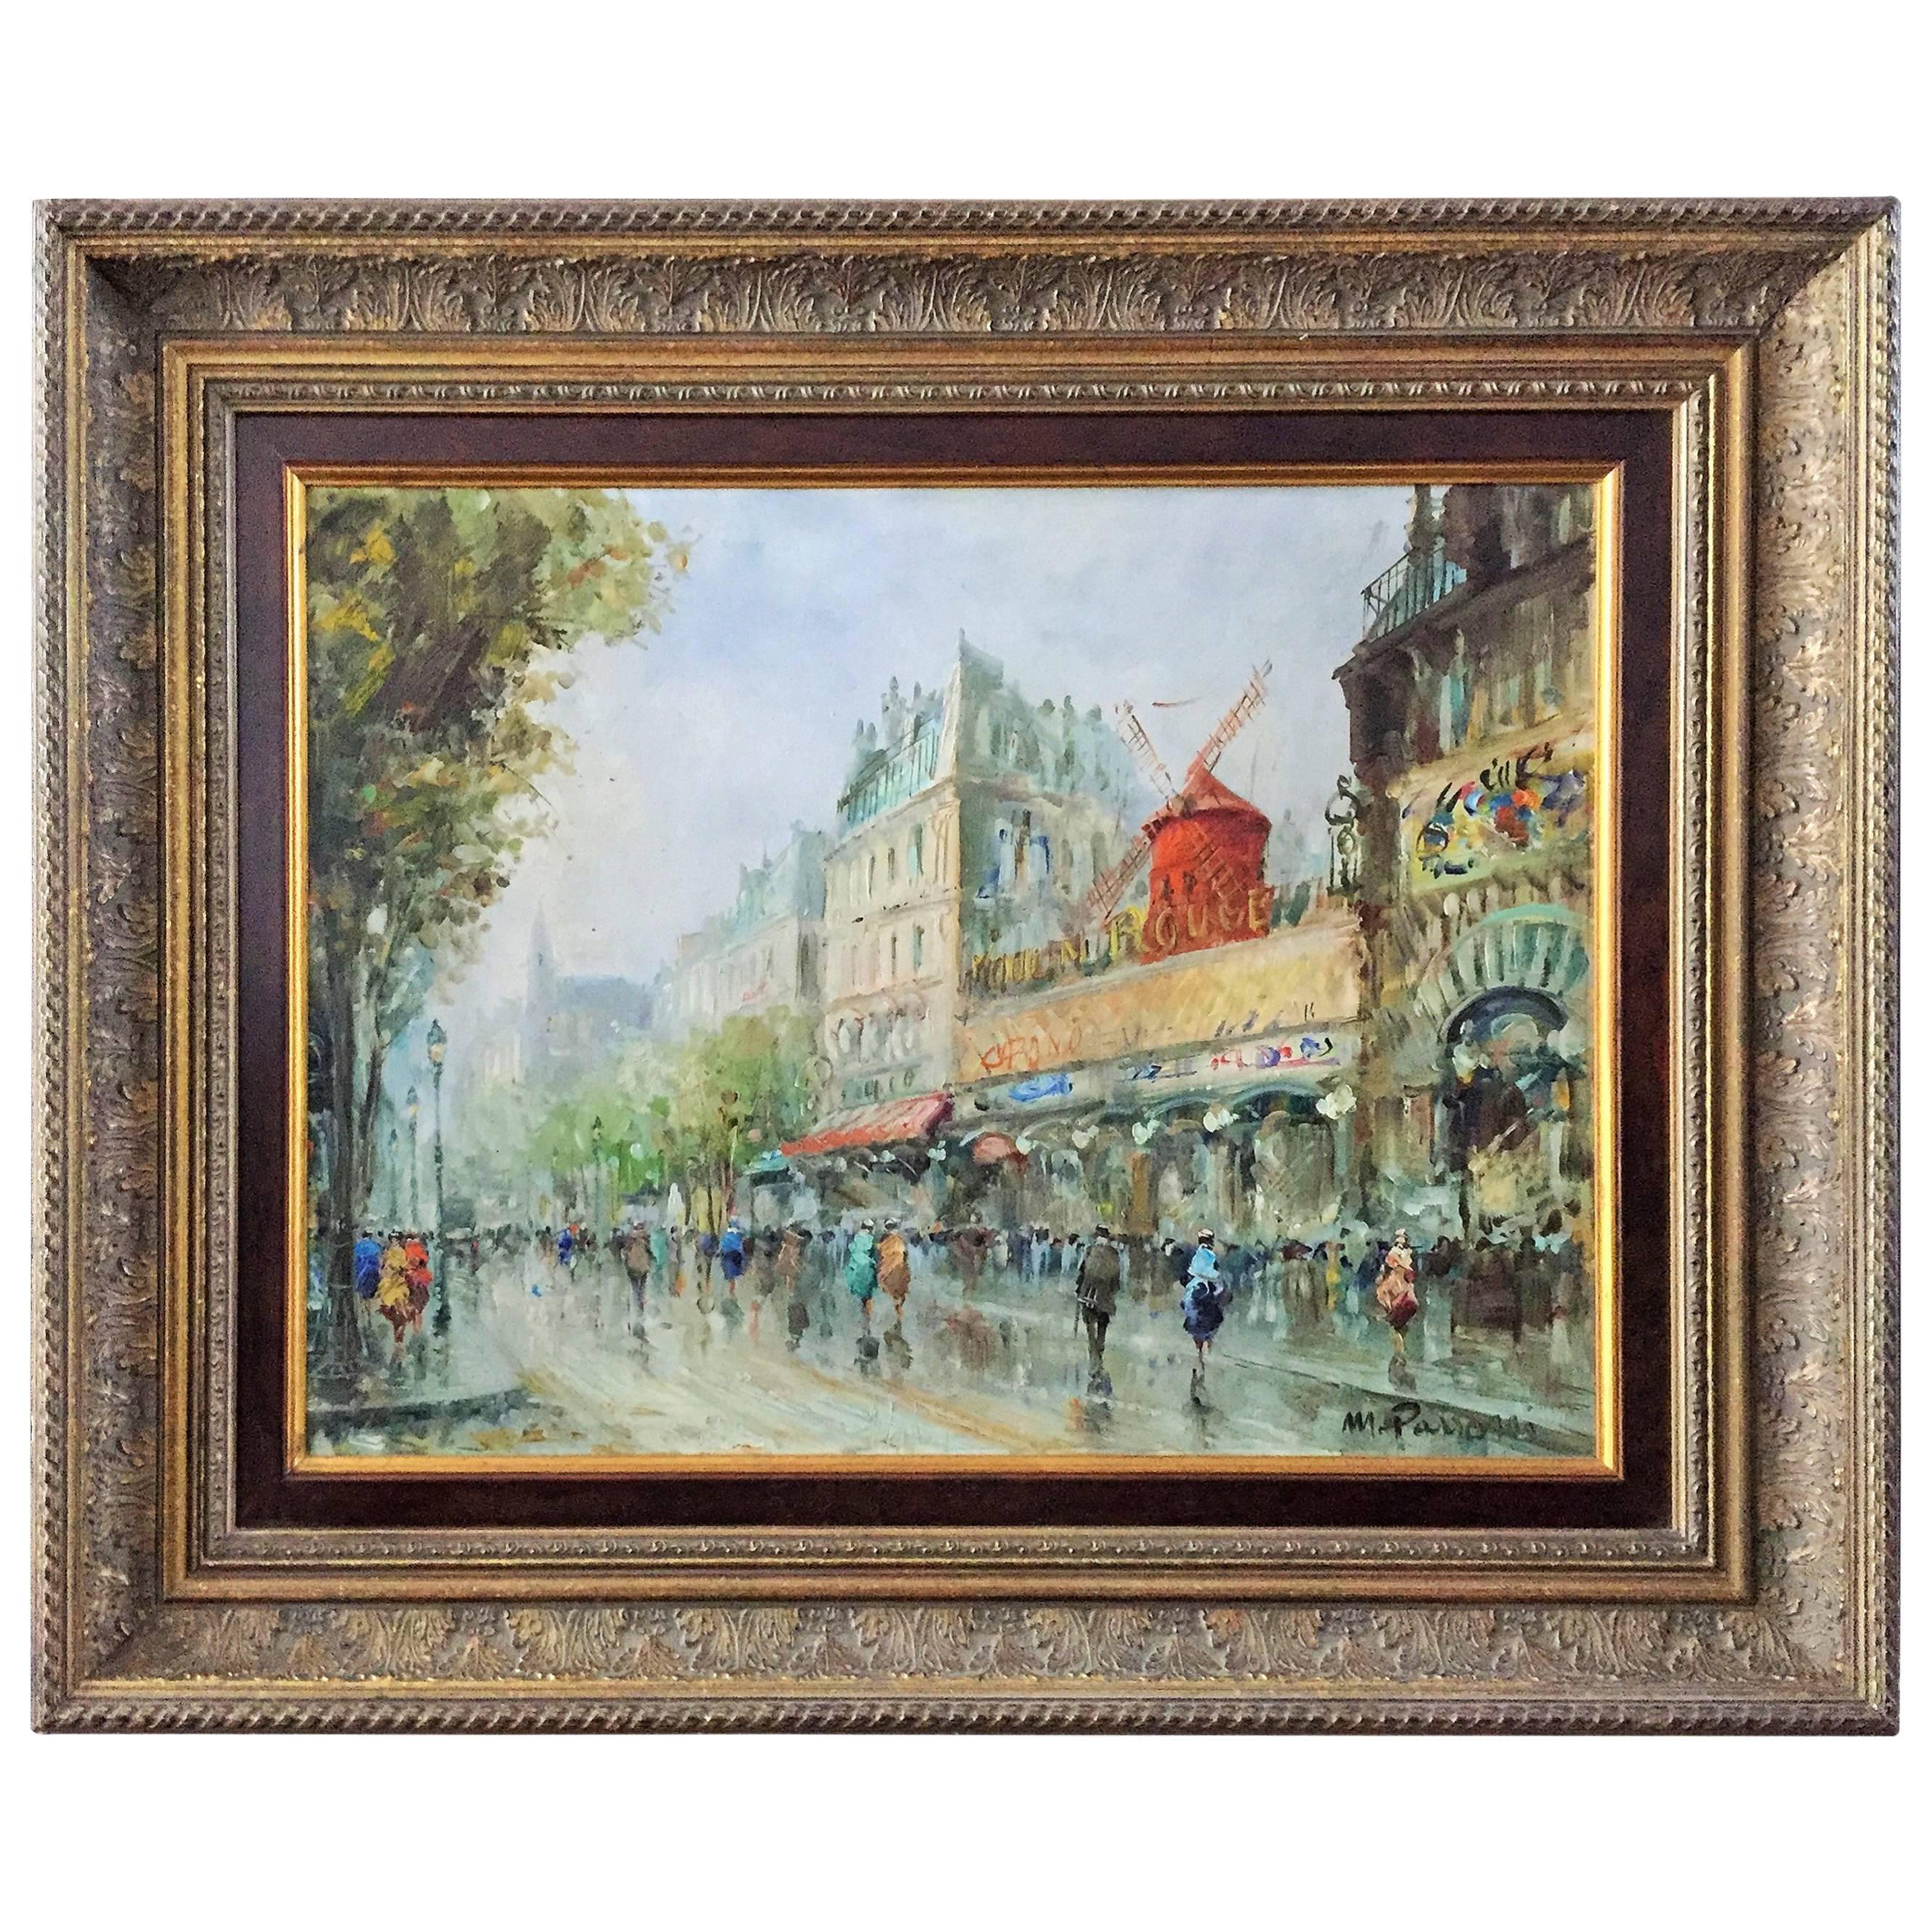 Early 20th Century French Oil Painting "Le Moulin Rouge" by Mario Passoni